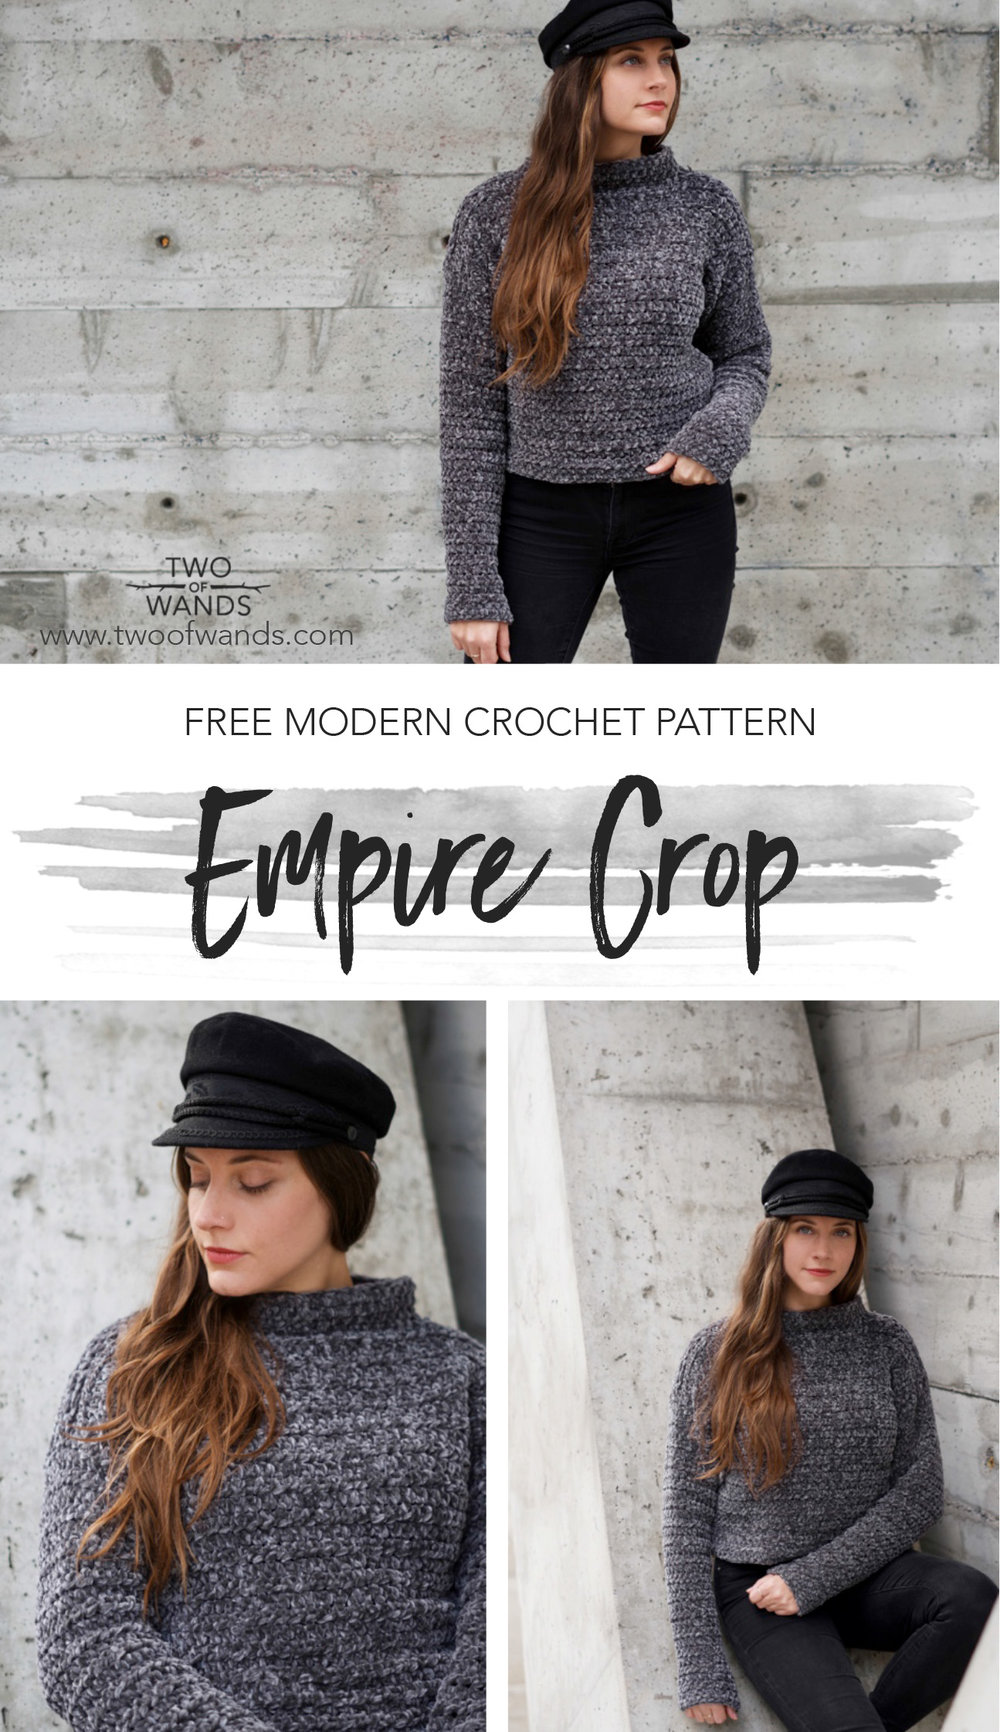 Empire Crop sweater pattern by Two of Wands